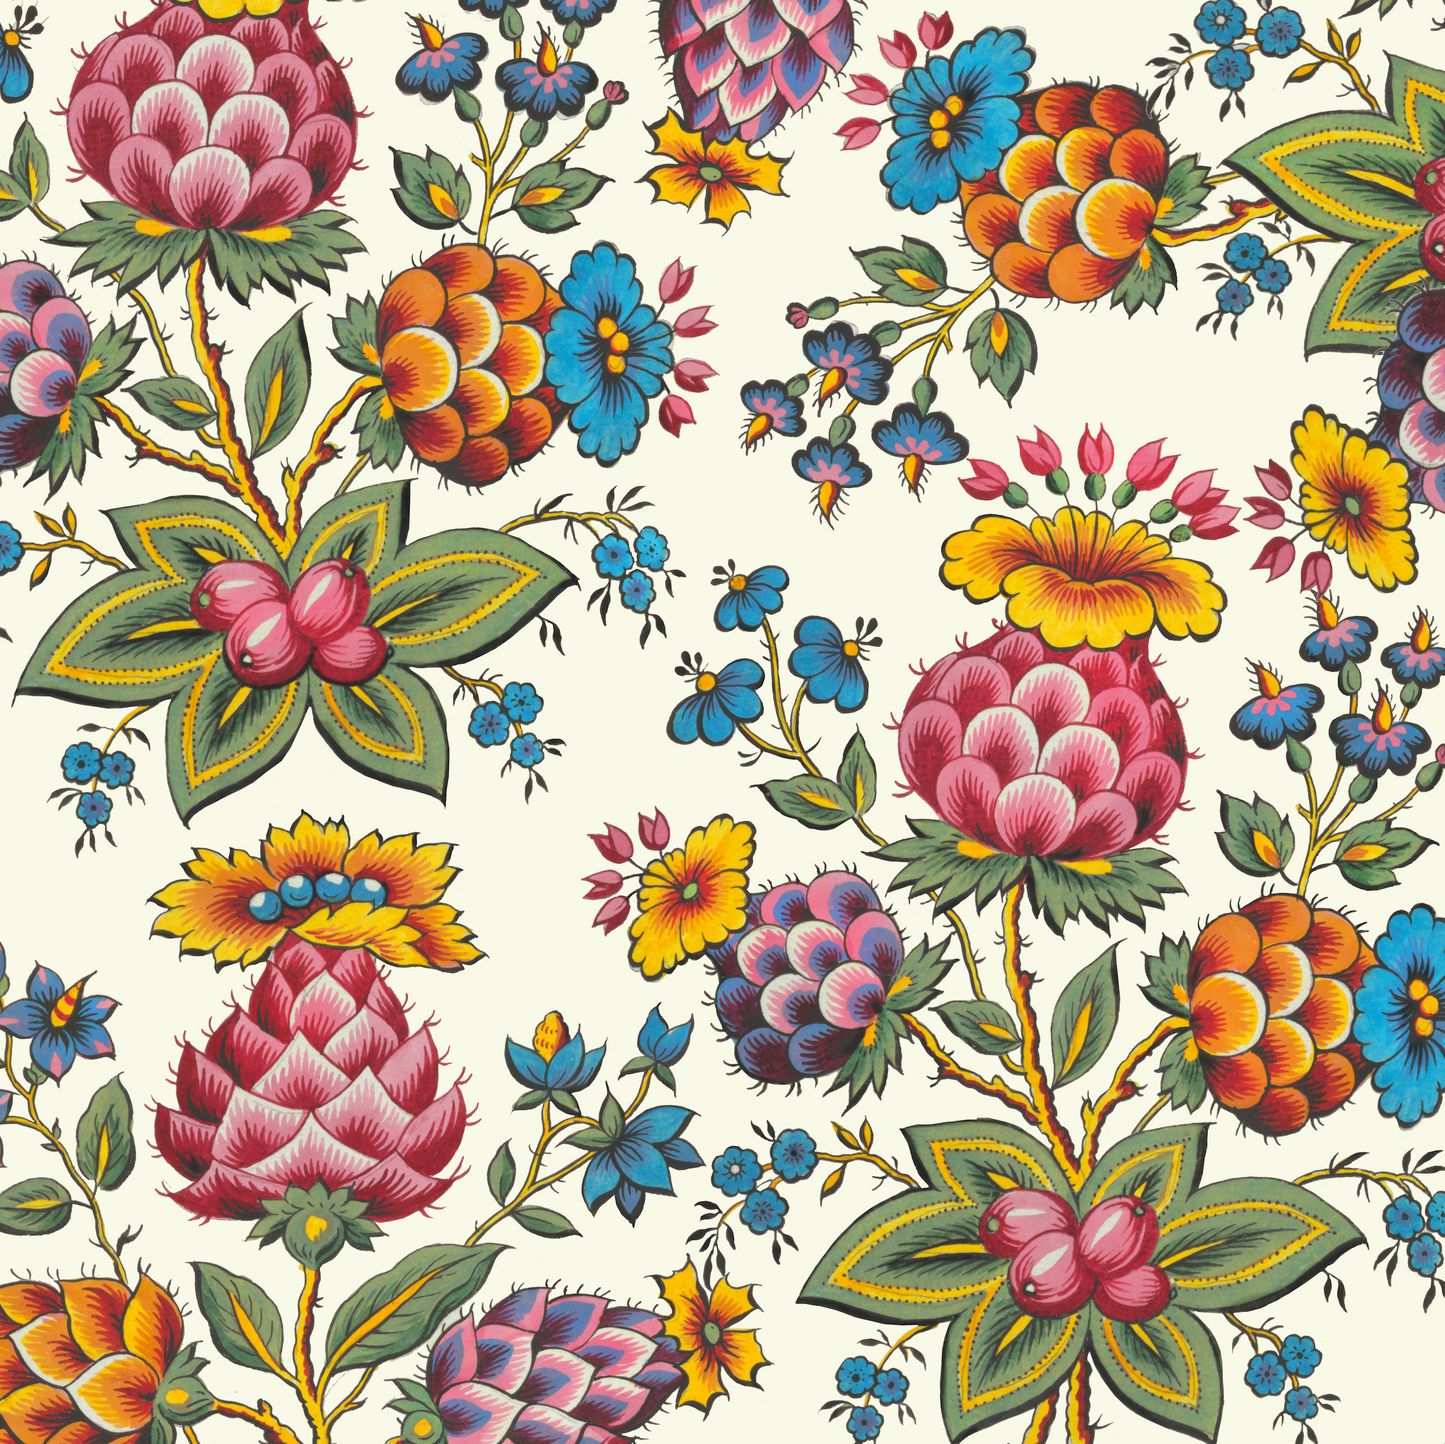 Sample vintage artwork featuring pink  and orange thistles, forget-me-not flowers, pink berries on a pale cream background